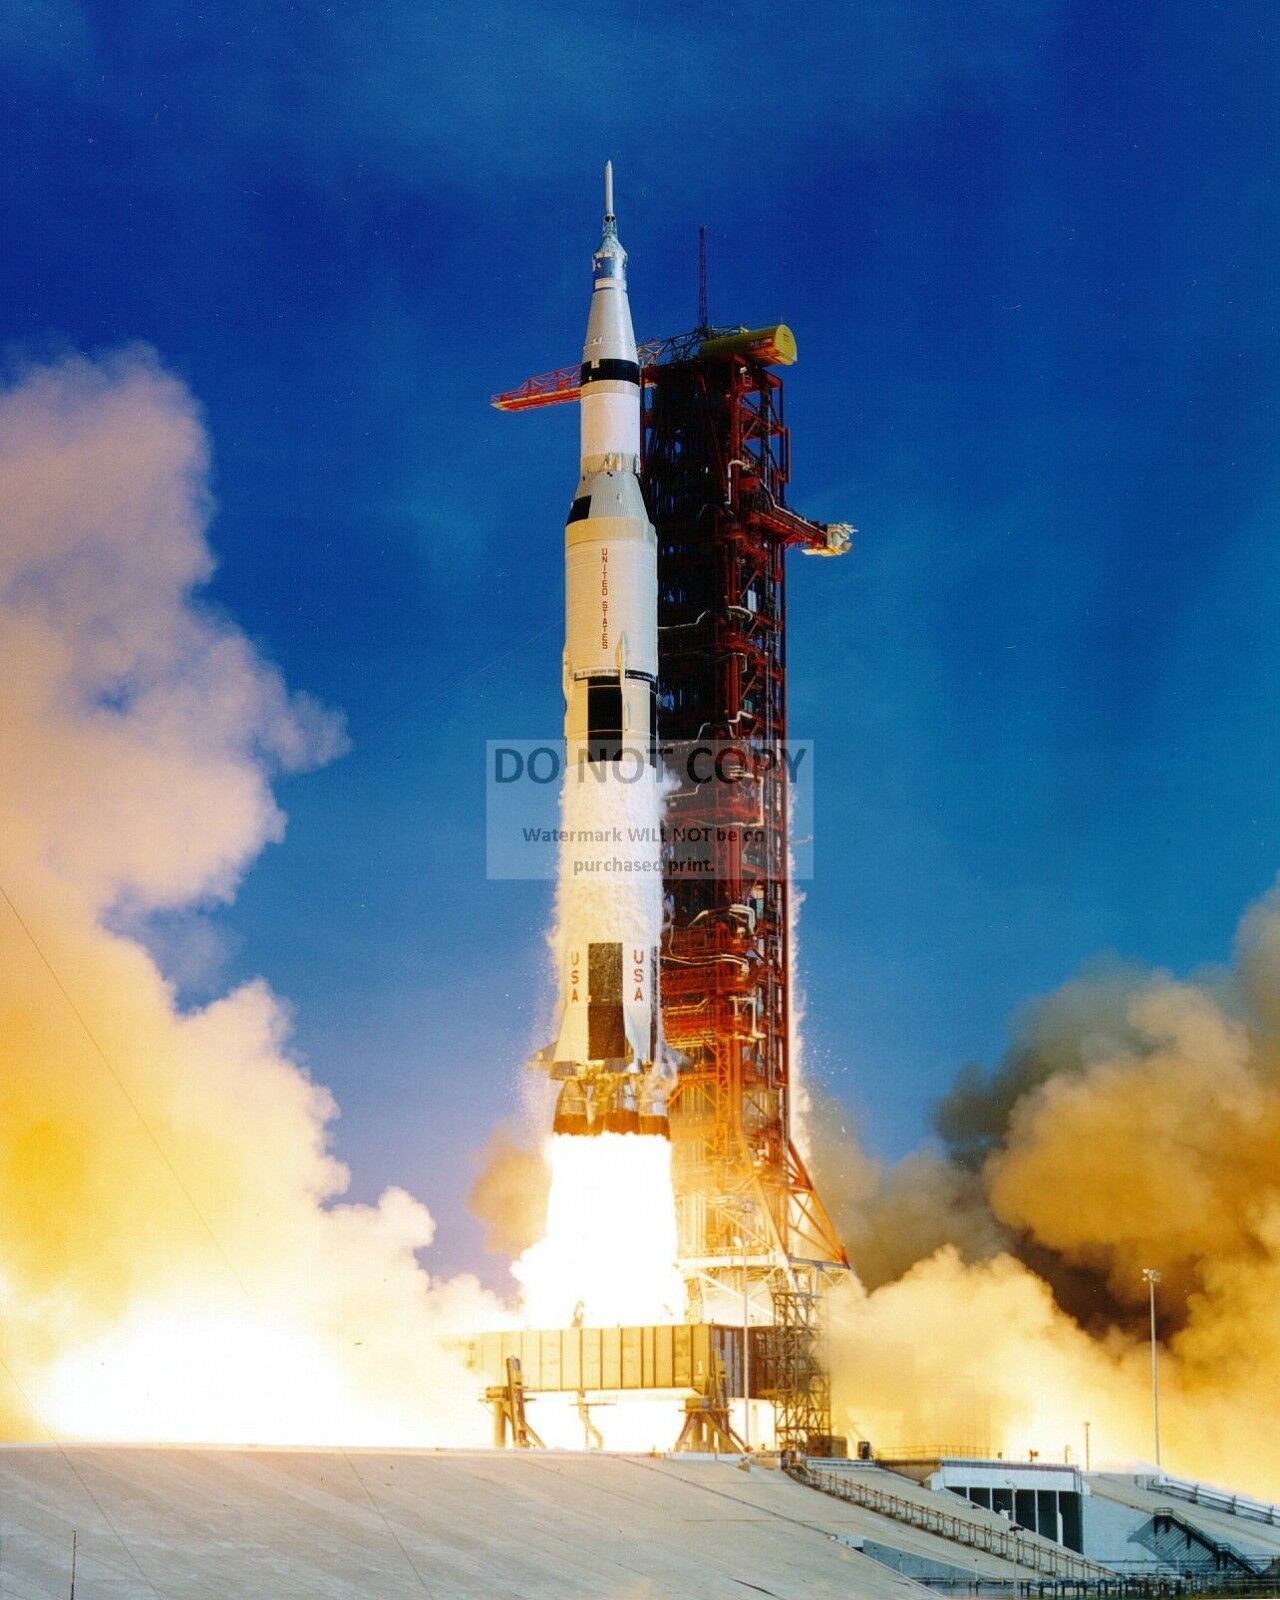 LIFT-OFF OF THE APOLLO 11 SATURN V FROM LAUNCH COMPLEX 39A - 8X10 PHOTO (BB-034)